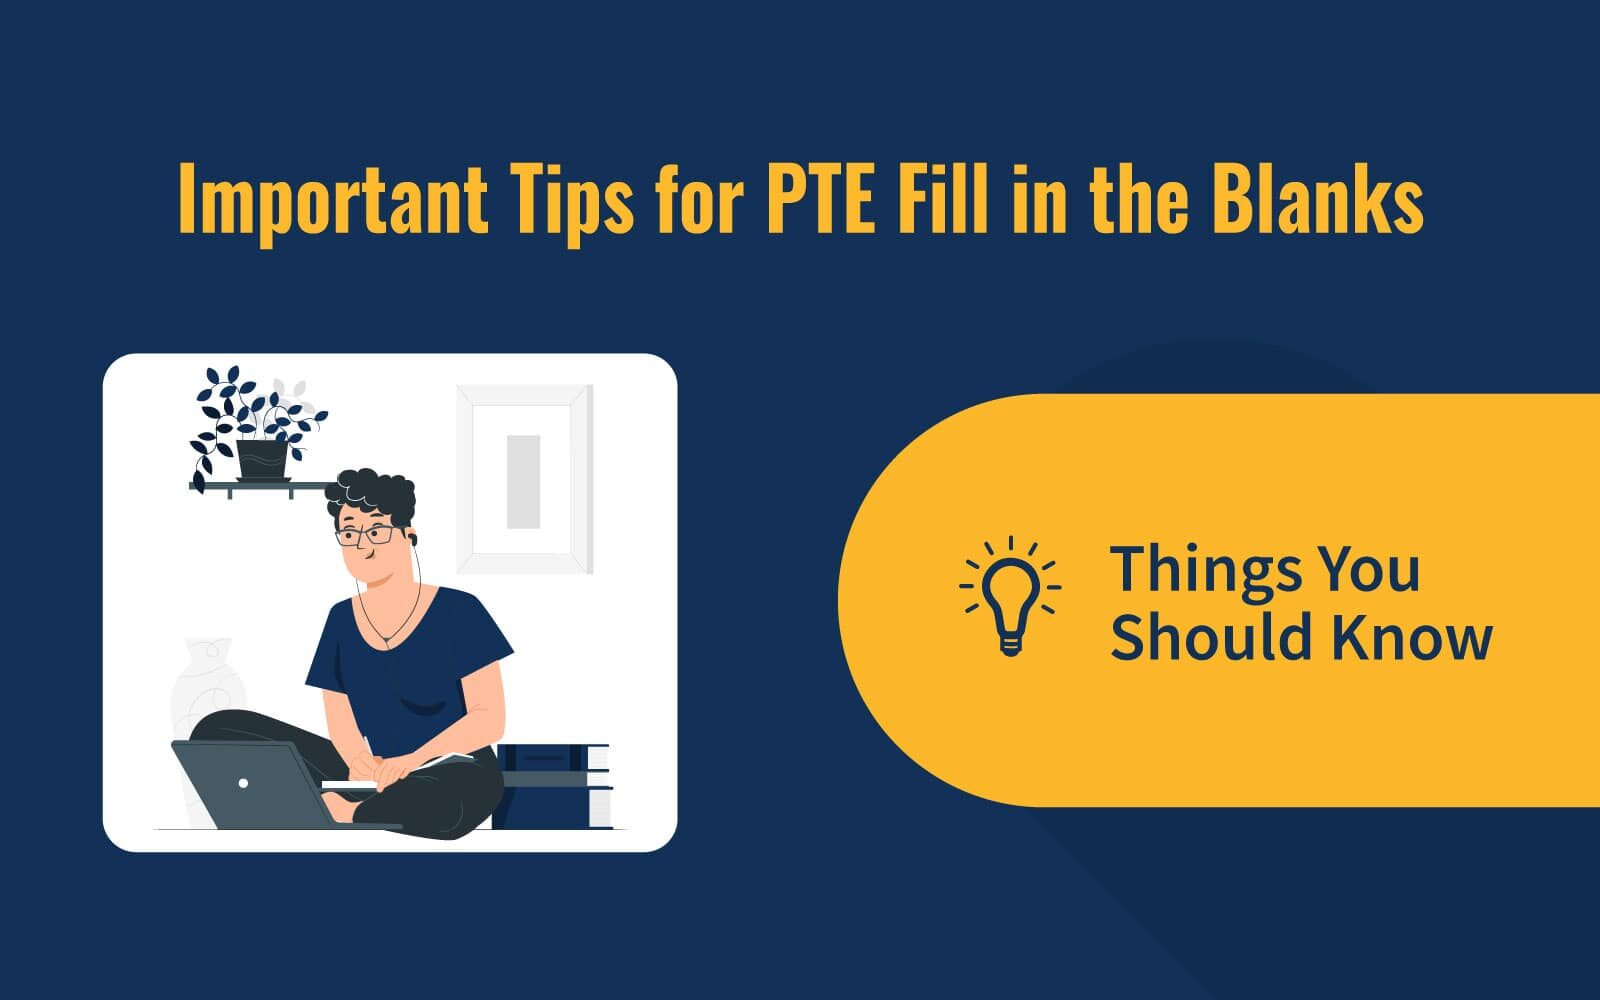 Important Tips for PTE Fill in the Blanks